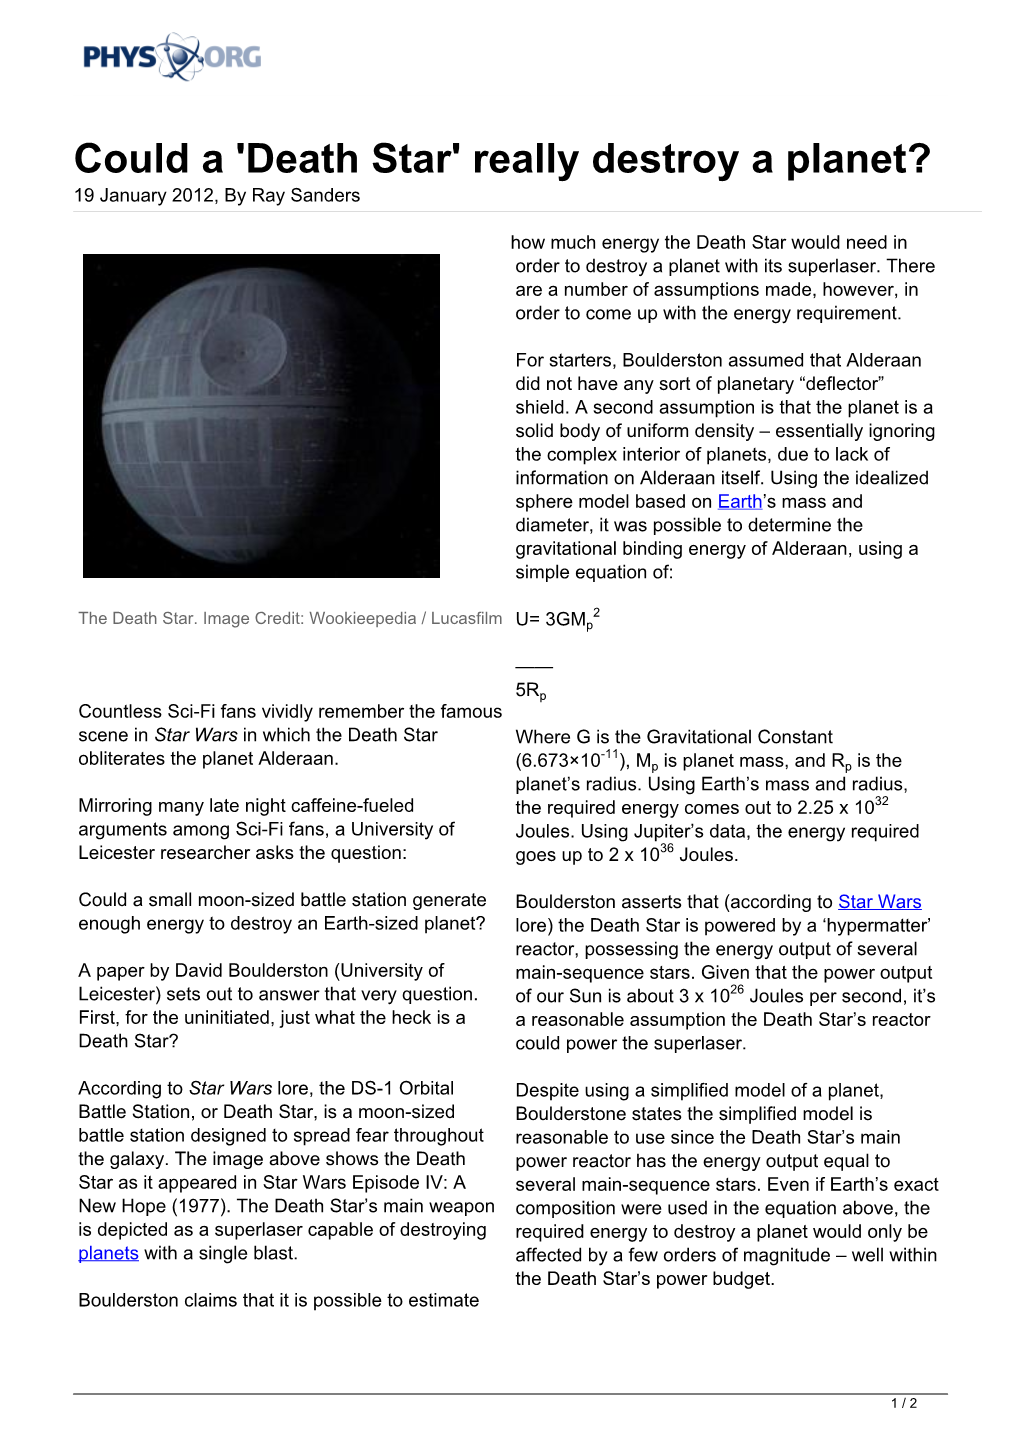 Death Star' Really Destroy a Planet? 19 January 2012, by Ray Sanders